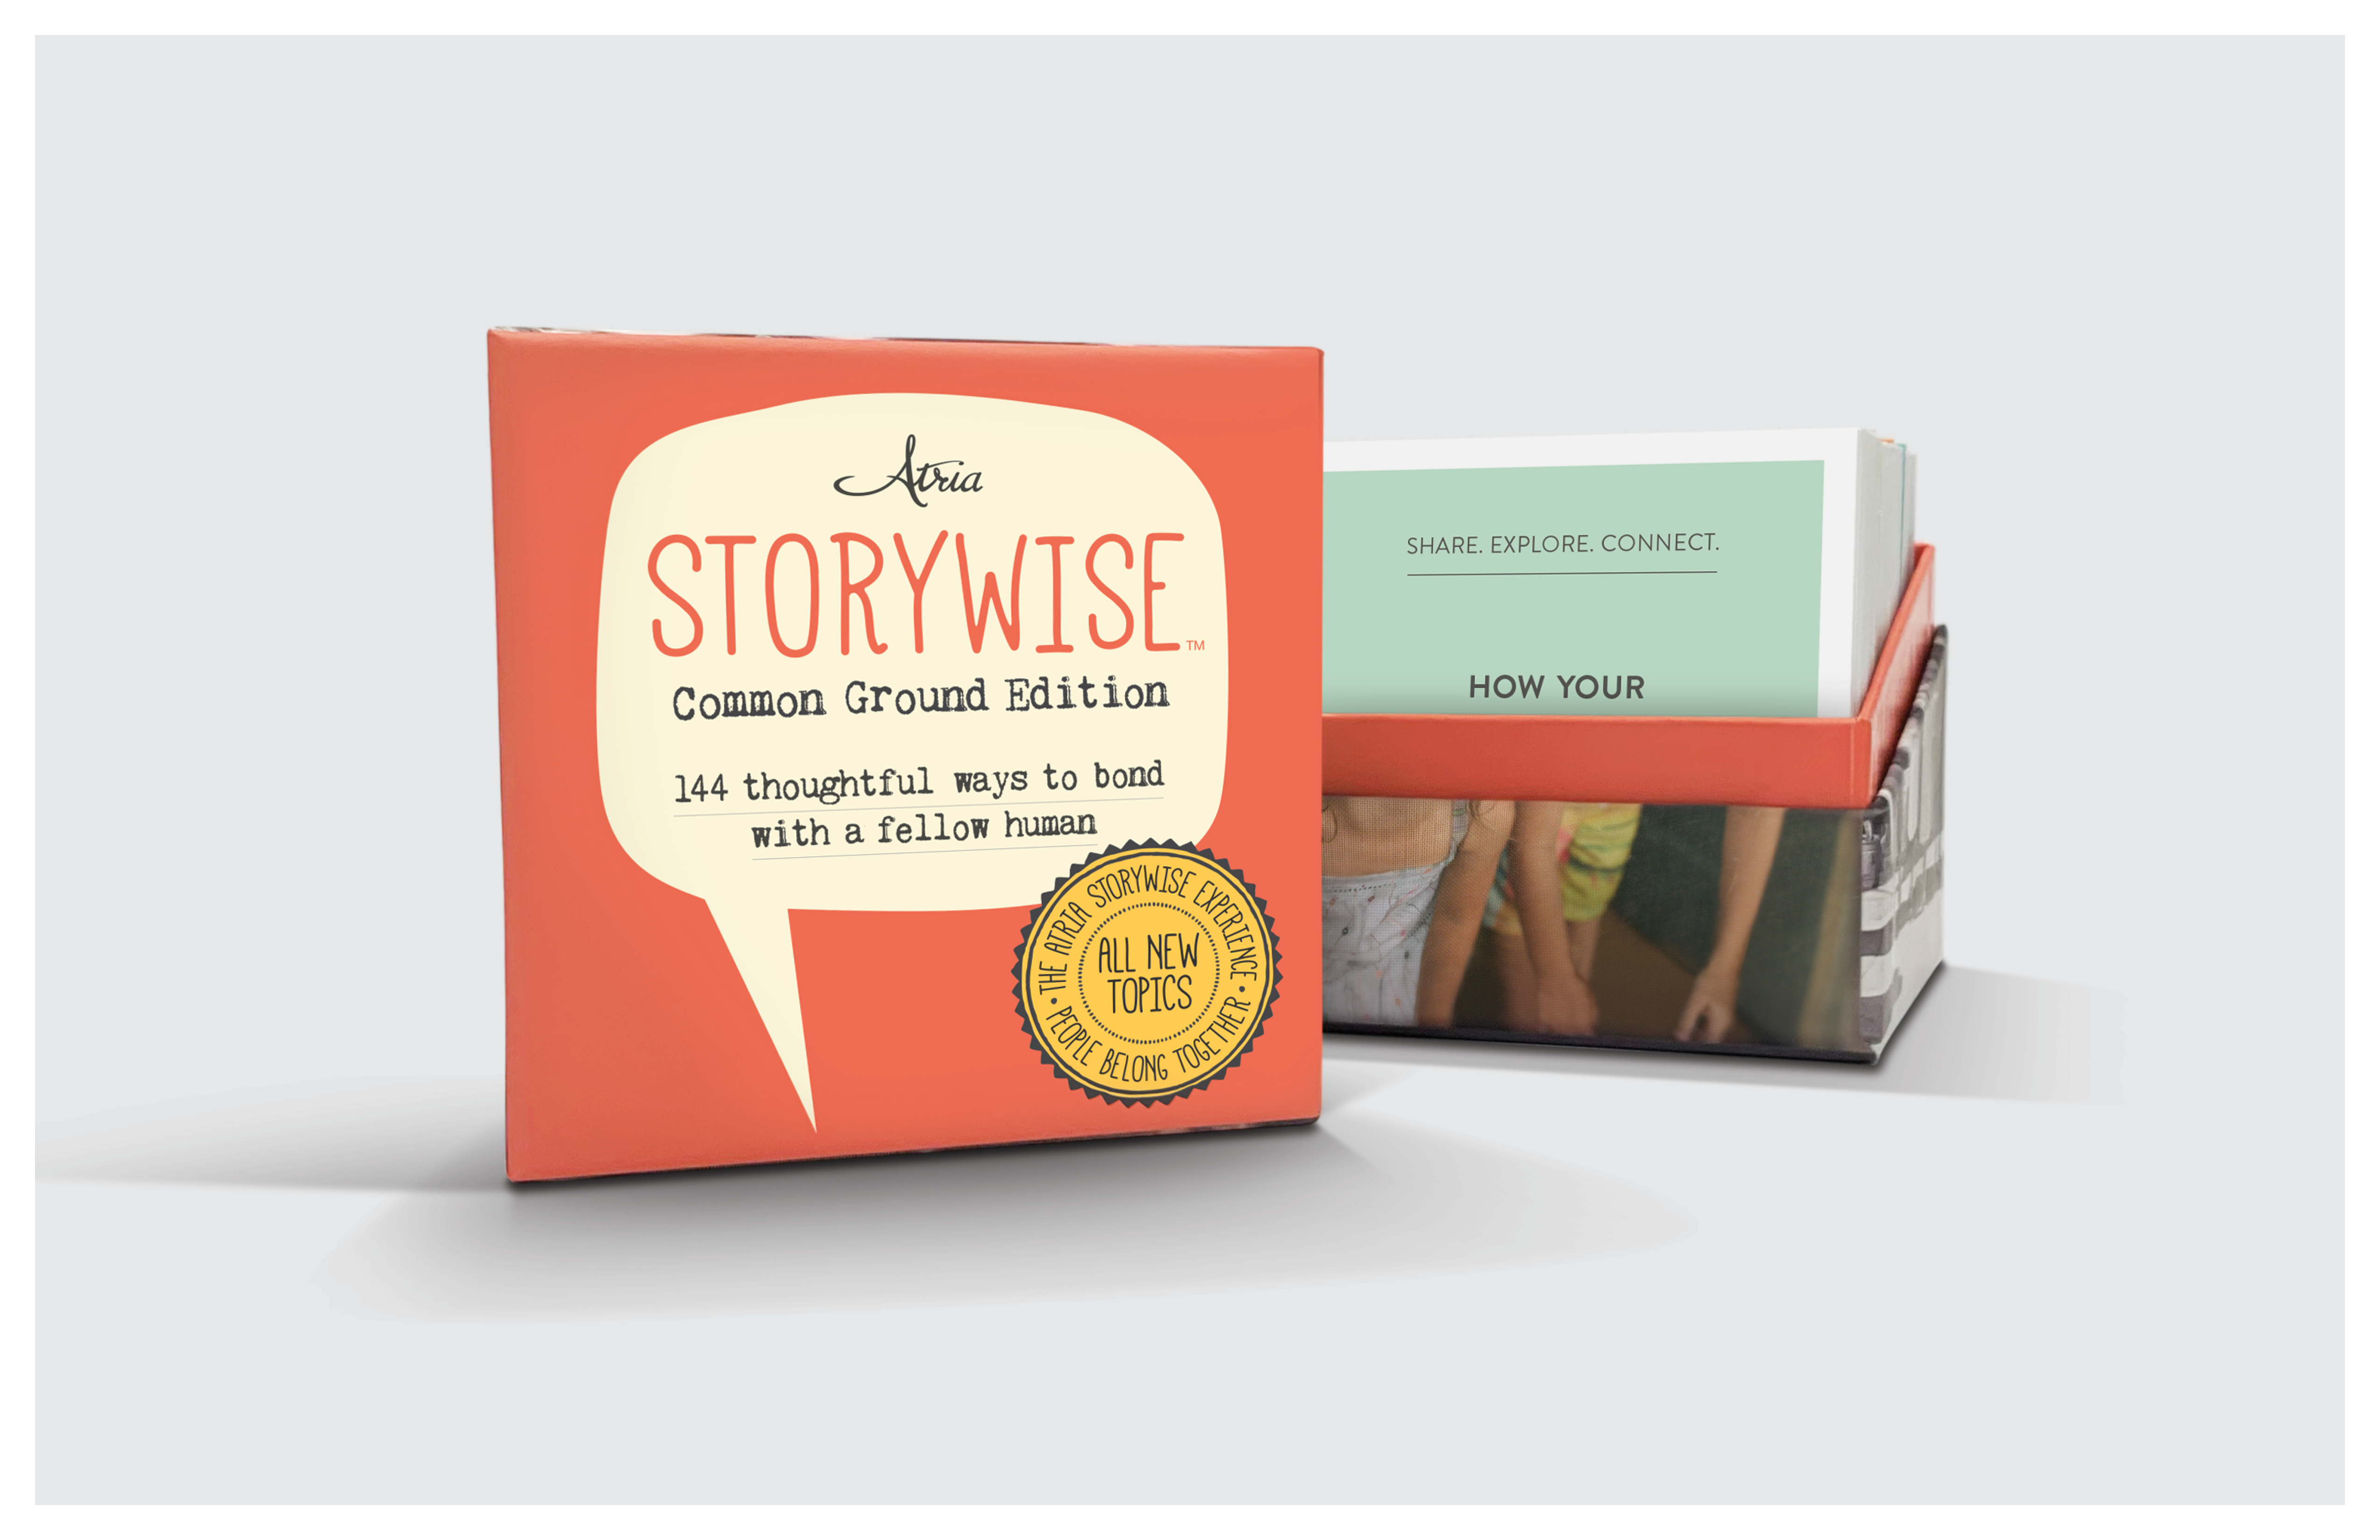 Atria Storywise Common Ground Edition 2018 New 144 Thoughtful Ways to Bond 